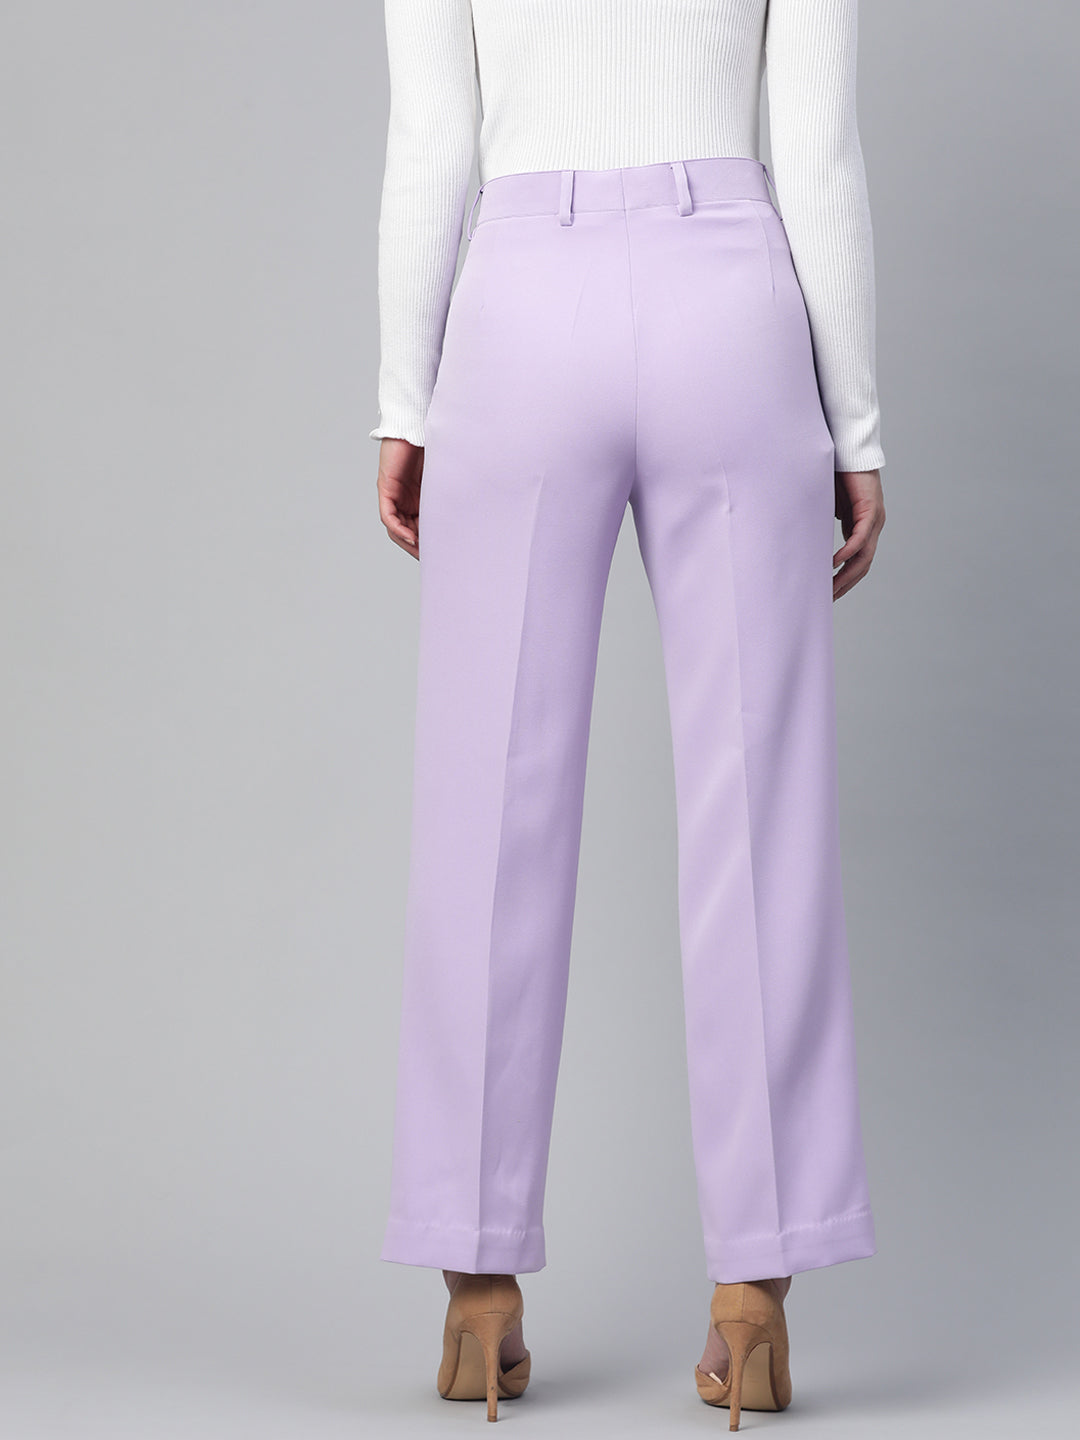 Lavender Viscose Comfort Fit Stretch Pleated Trouser